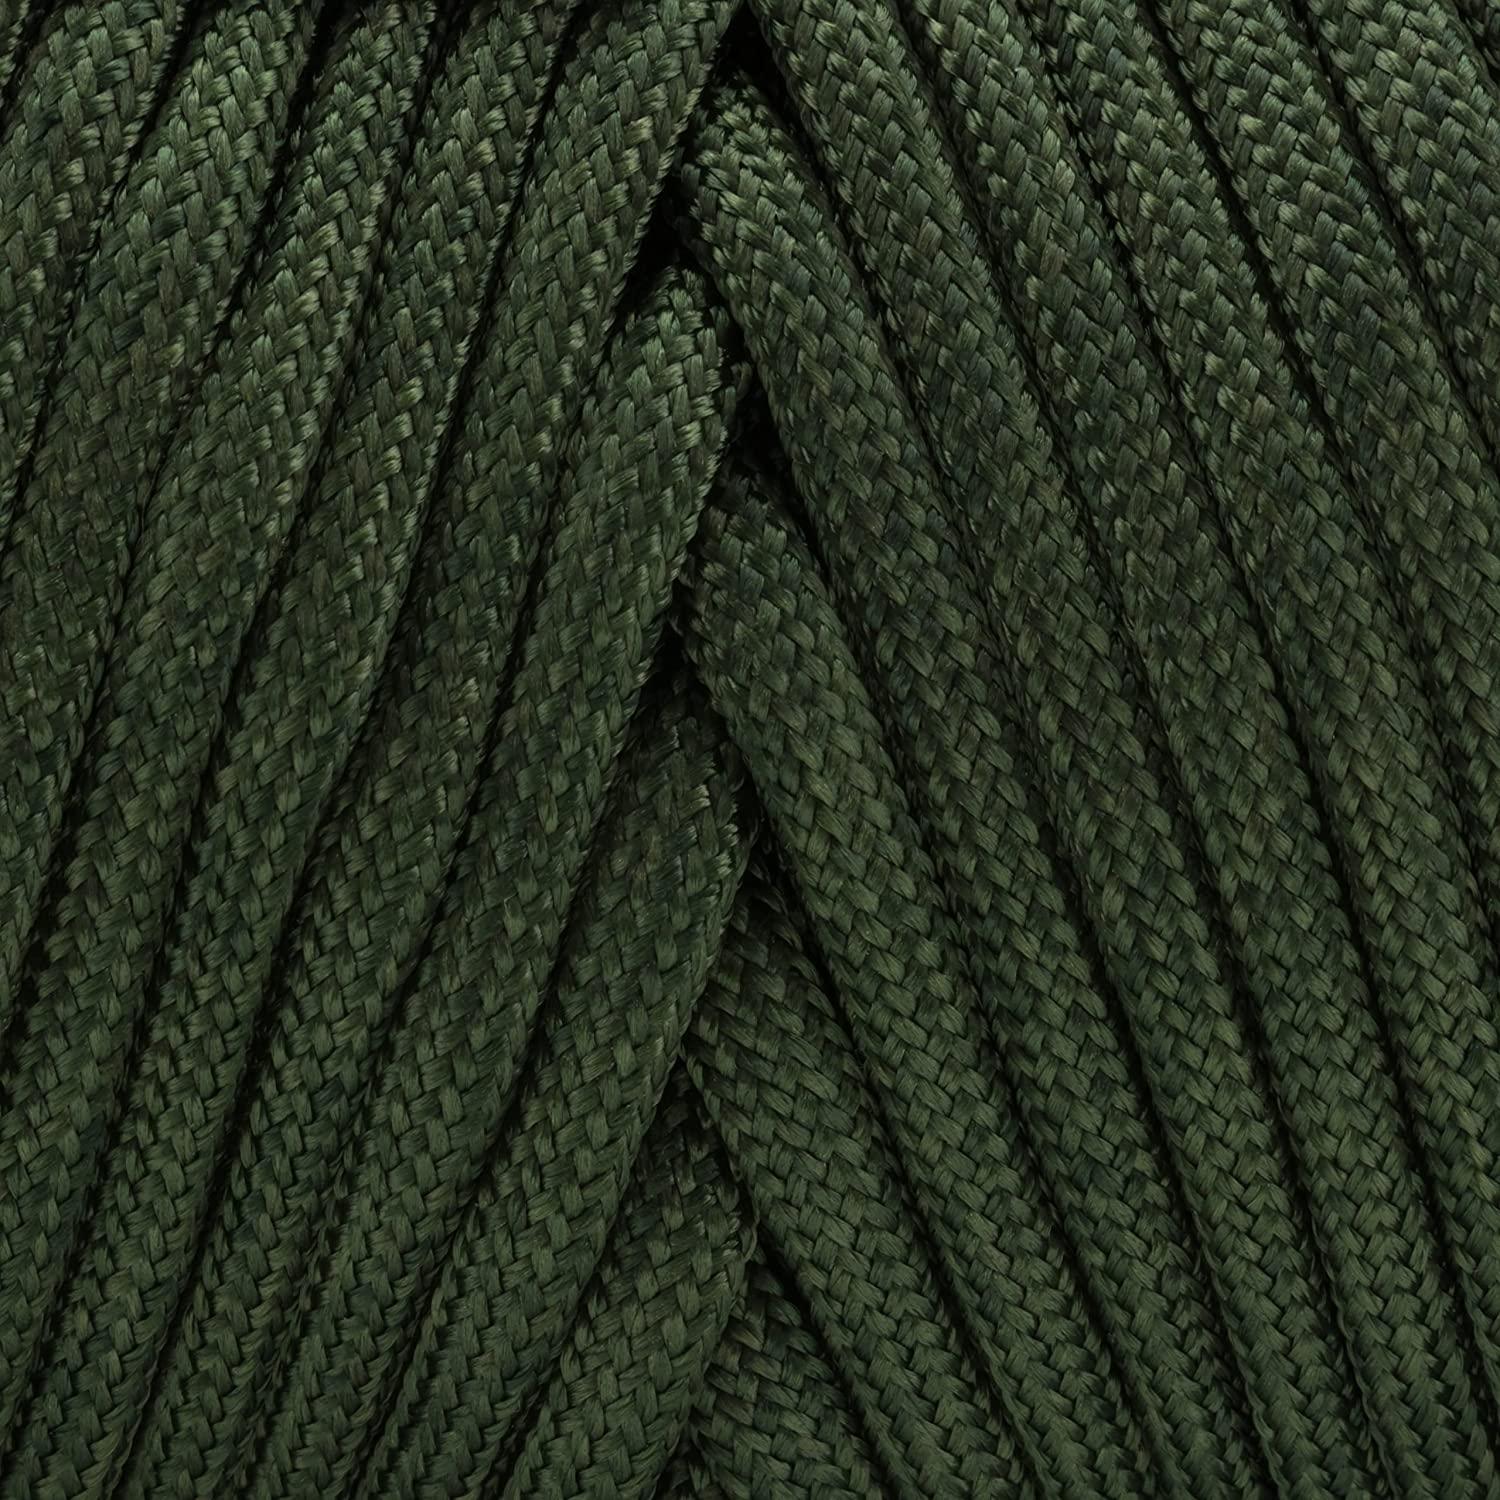 TOUGH-GRID 750lb Paracord Parachute Cord Genuine Mil Type IV 750lb Paracord by The US Military (MIl-C-5040-H) - 100 Nylon Camo Green 50Ft. (Coiled in Bag)